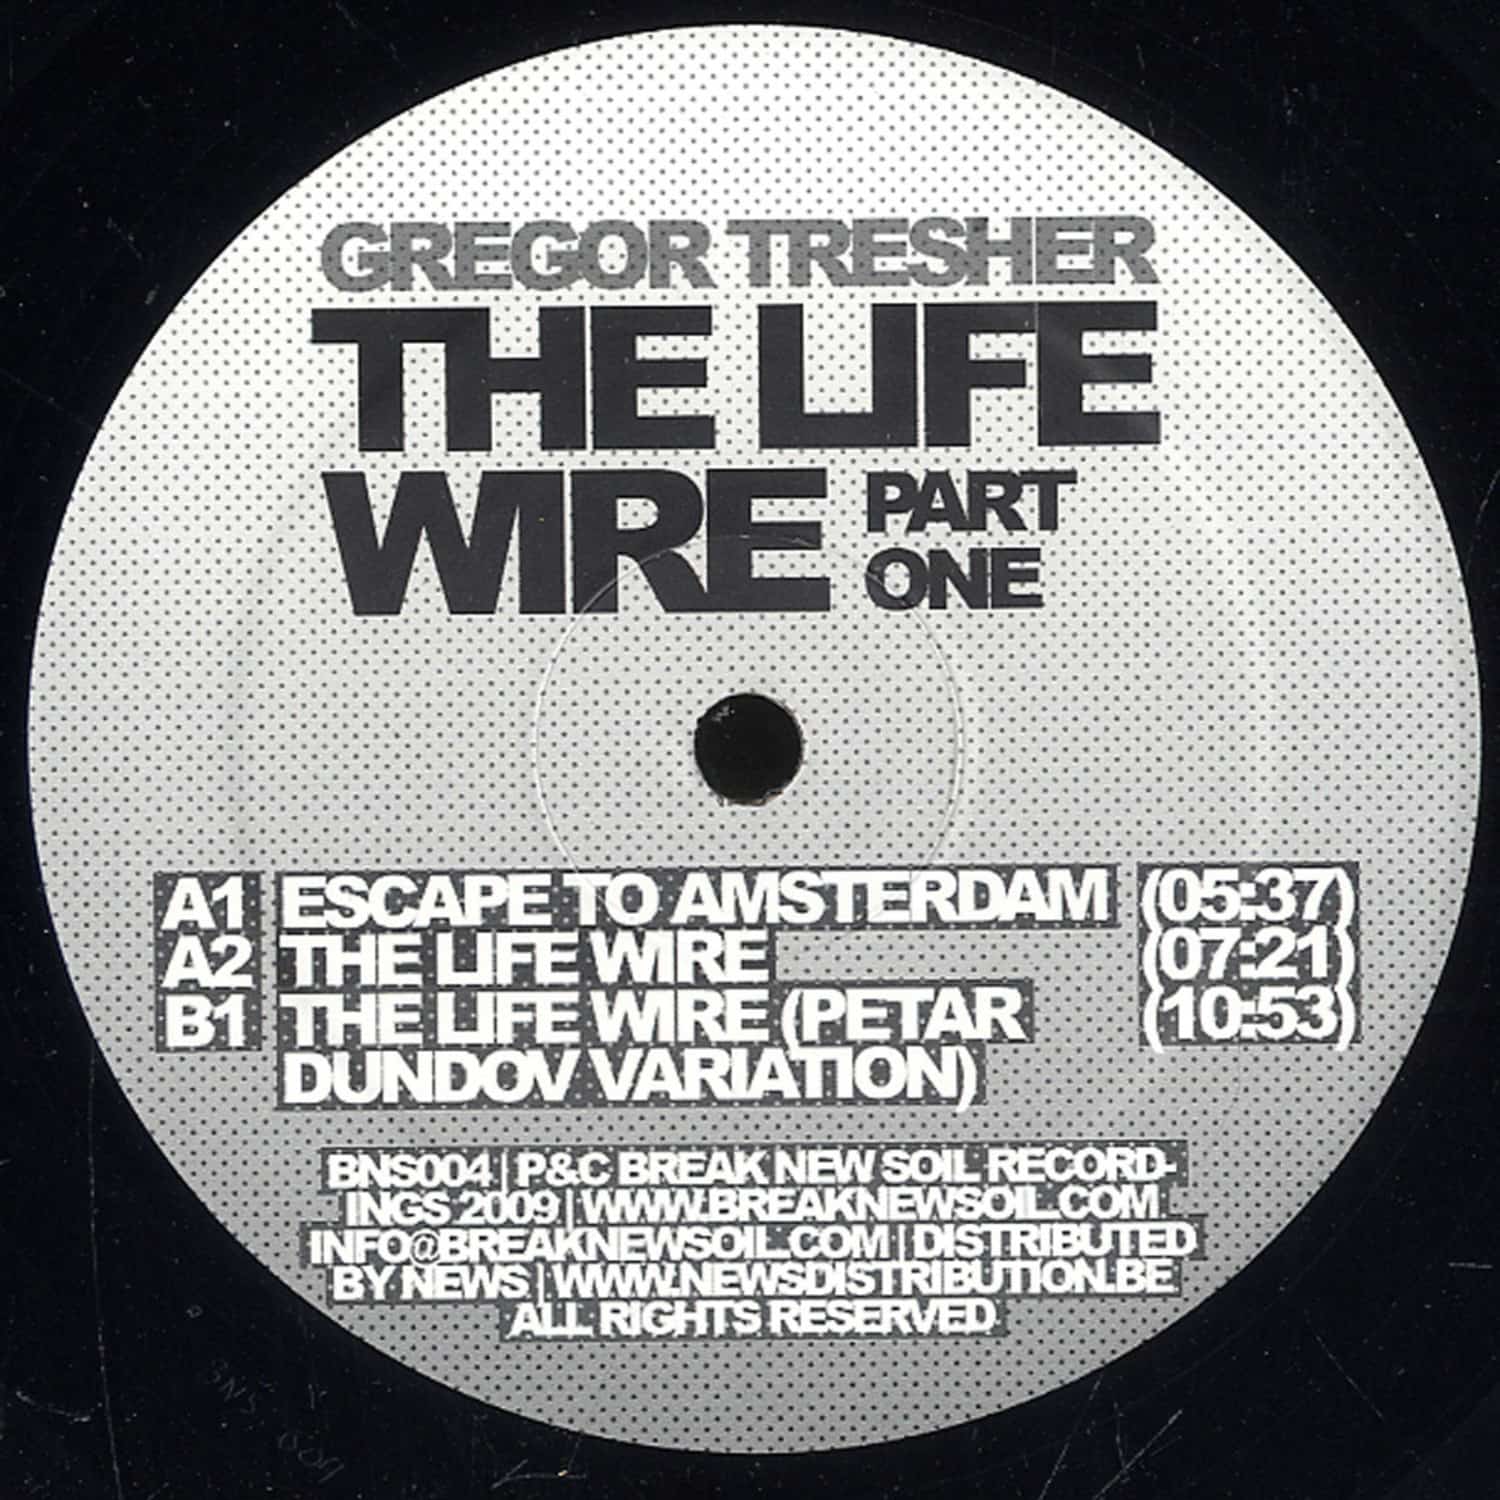 Gregor Tresher - THE LIFE WIRE PART 1